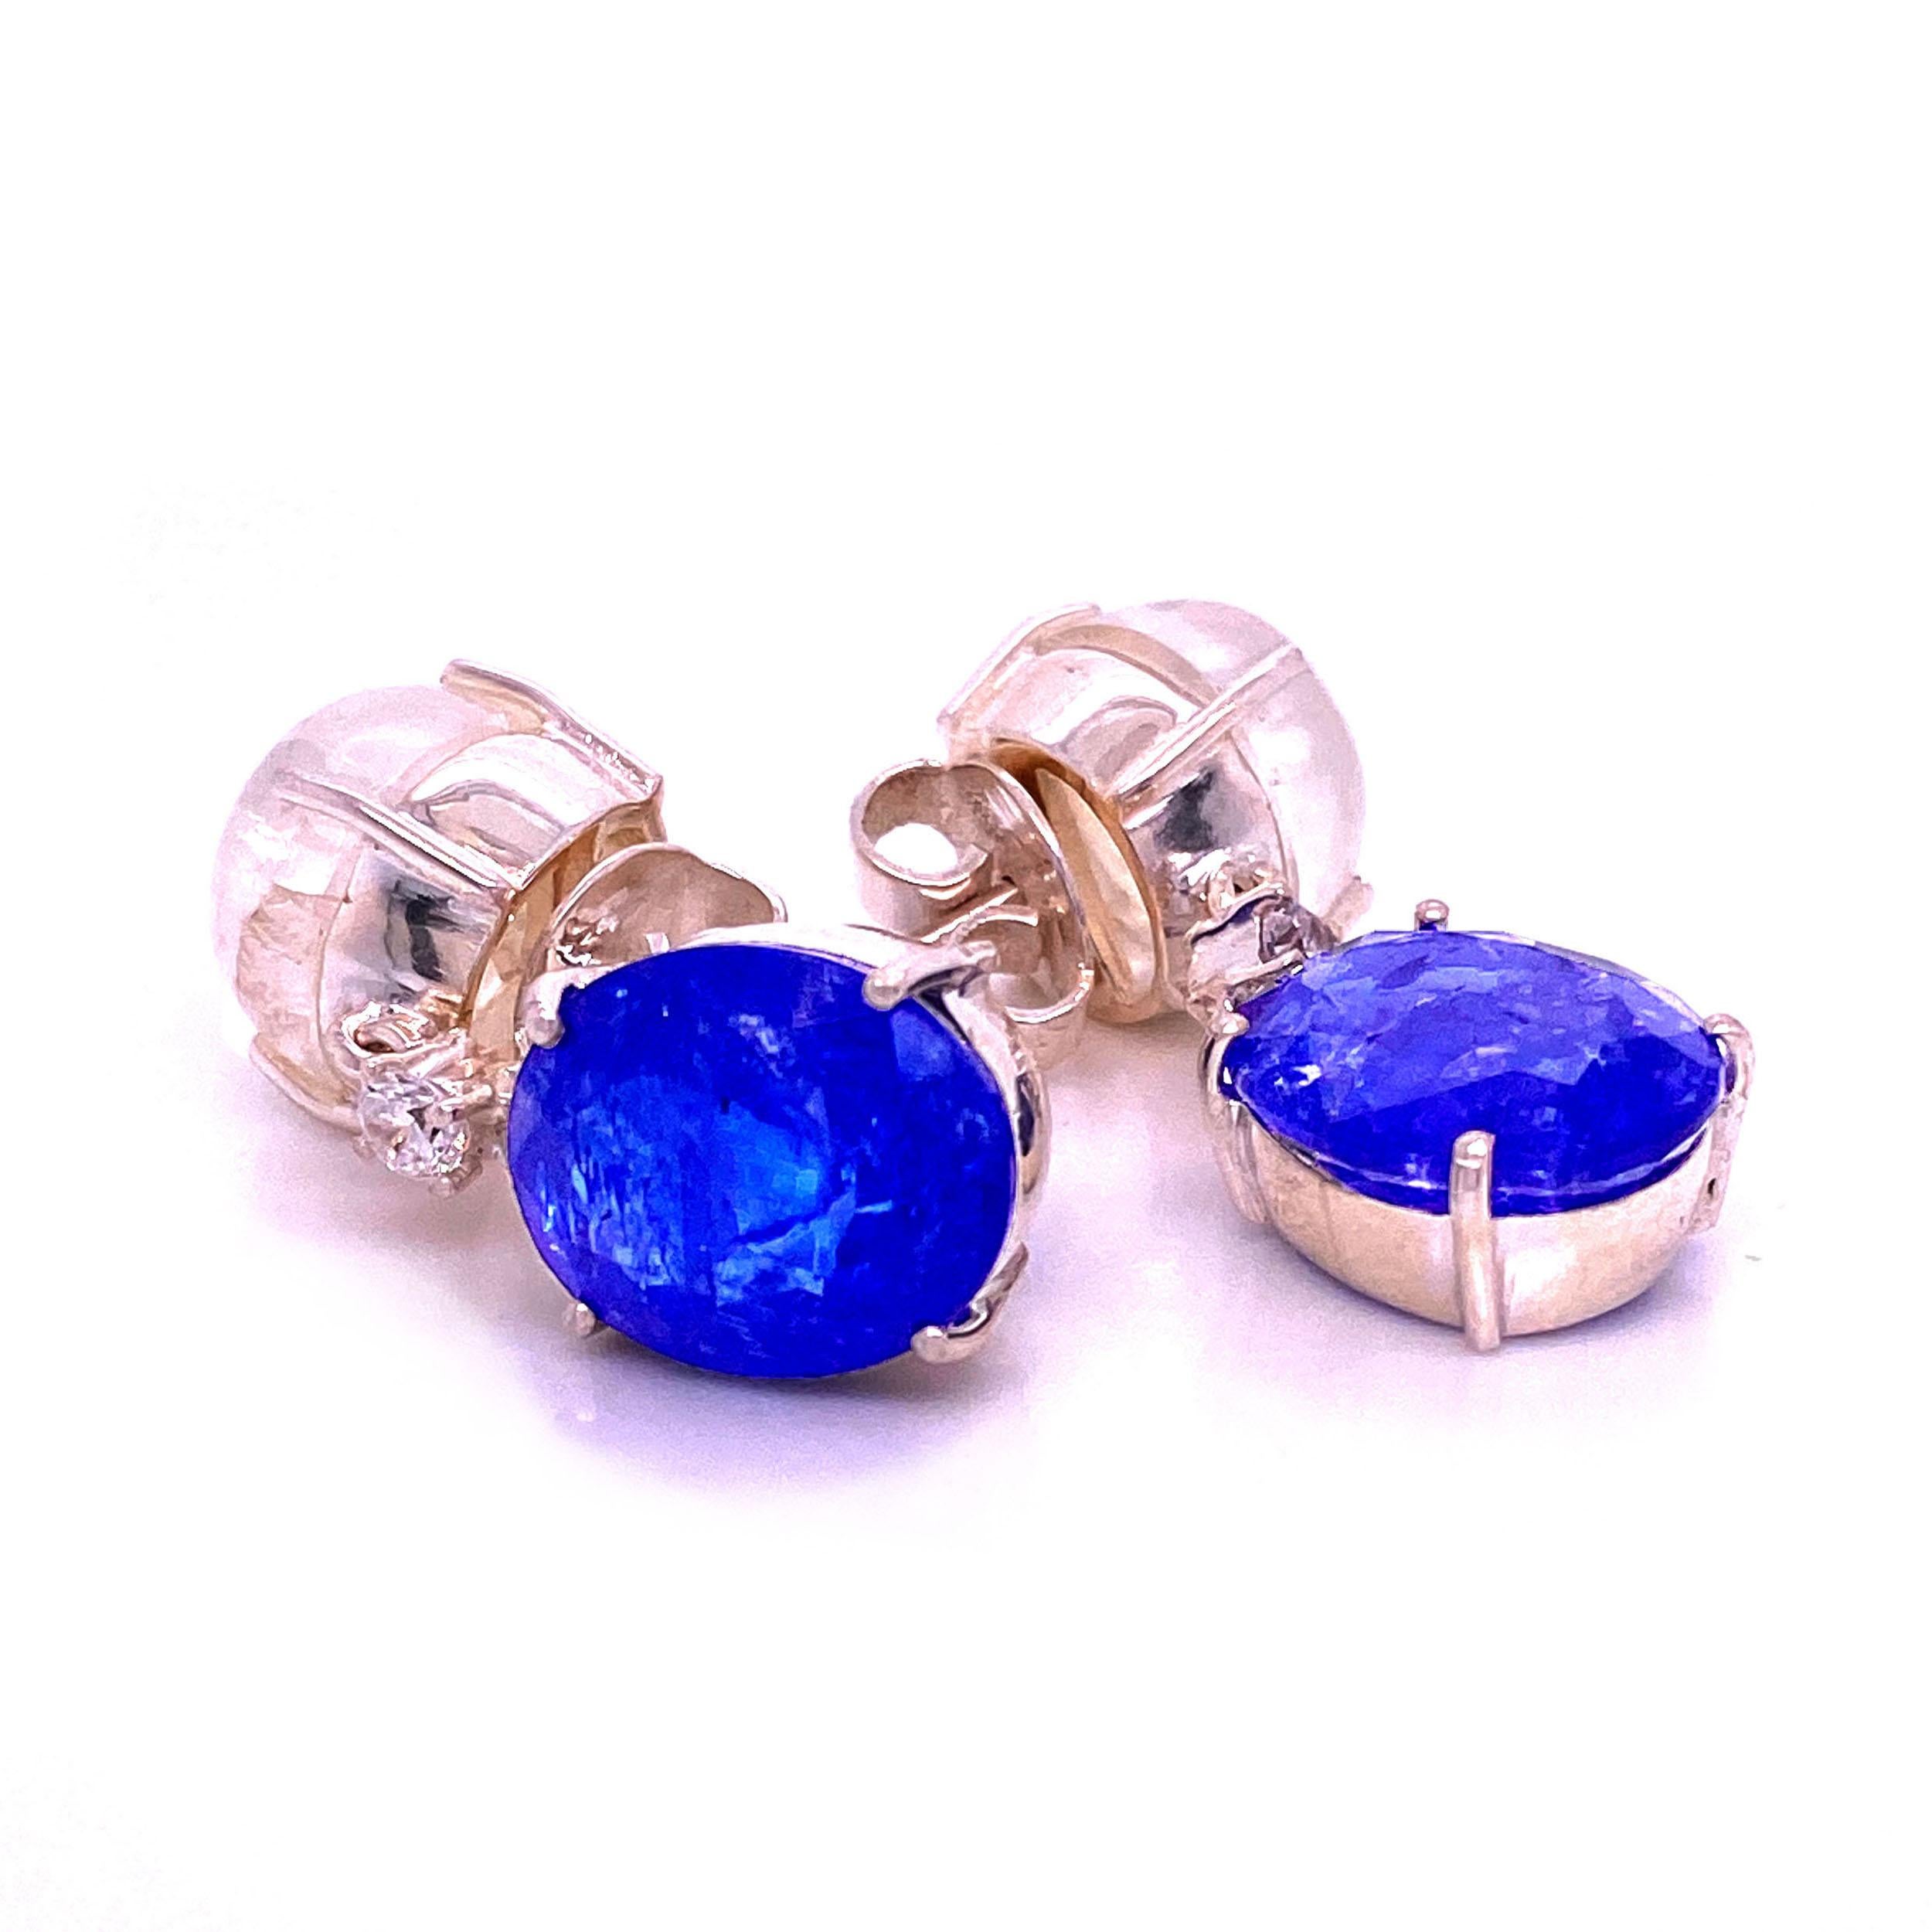 Oval Cut Tanzanite and Moonstone 'Nautical Collection'  Earrings